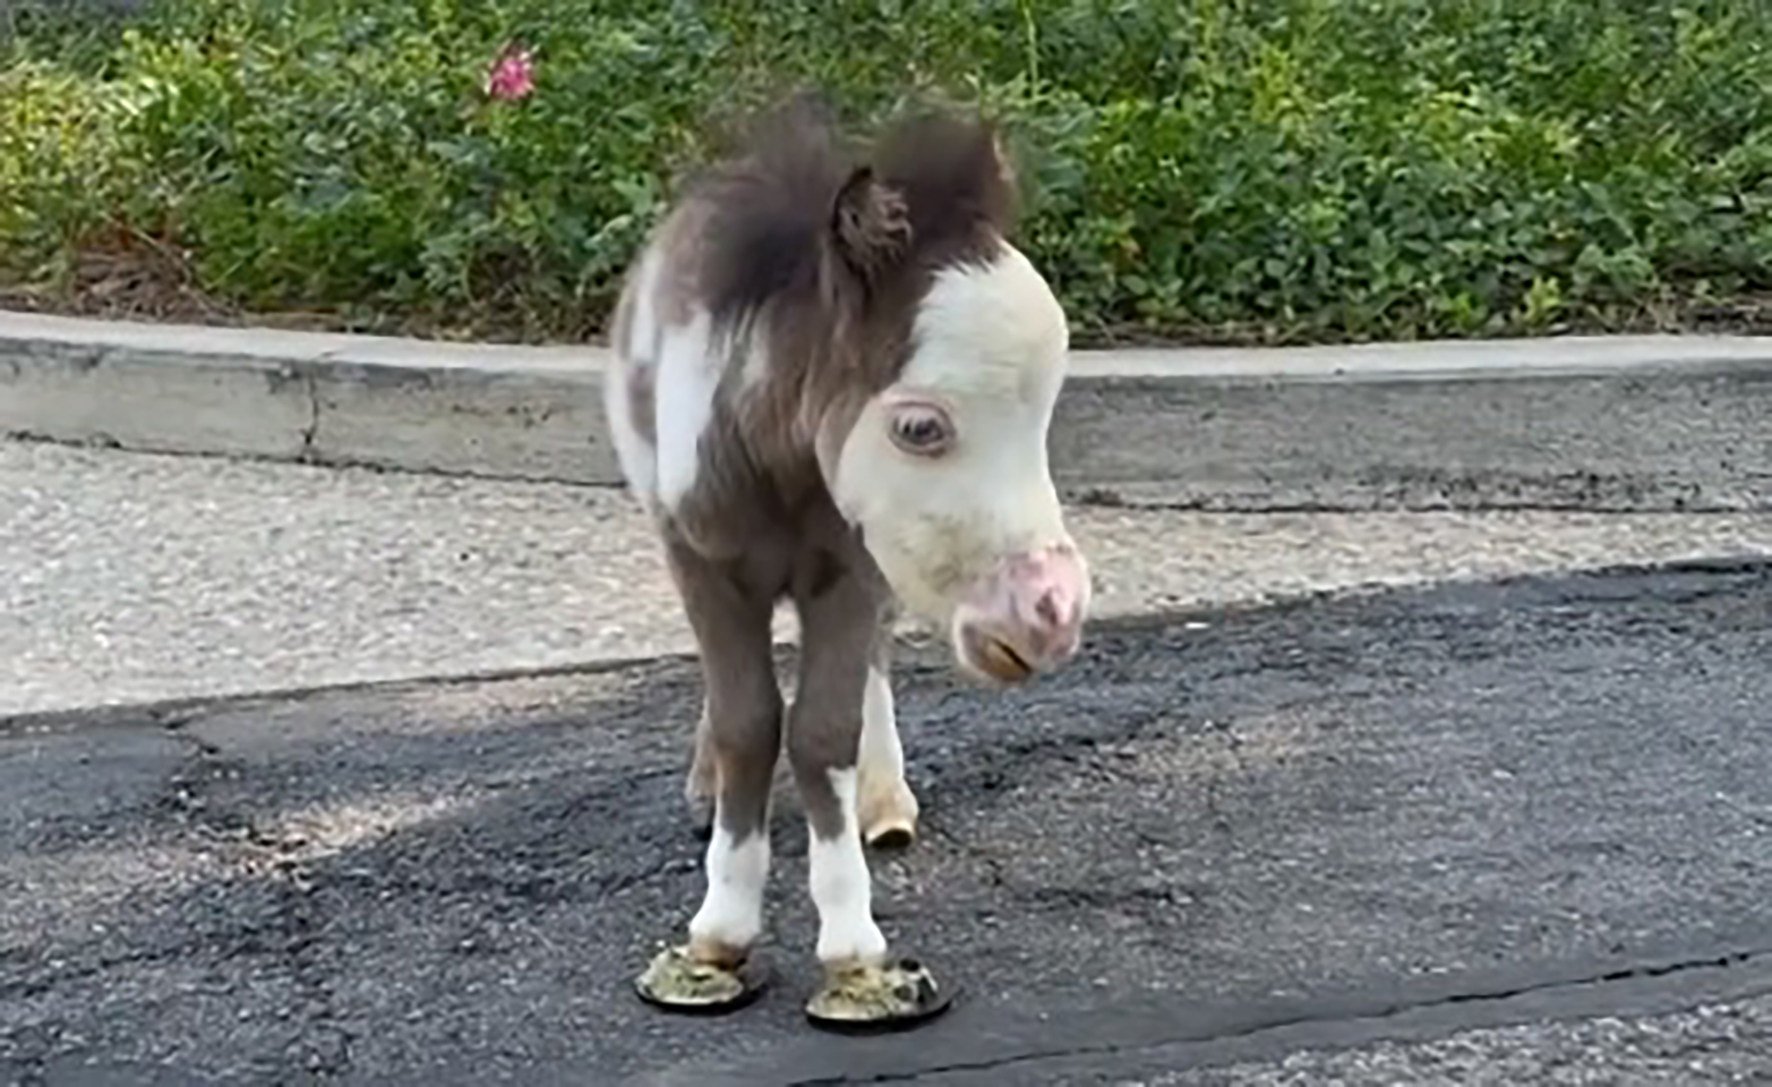 the smallest horse in the world 2022